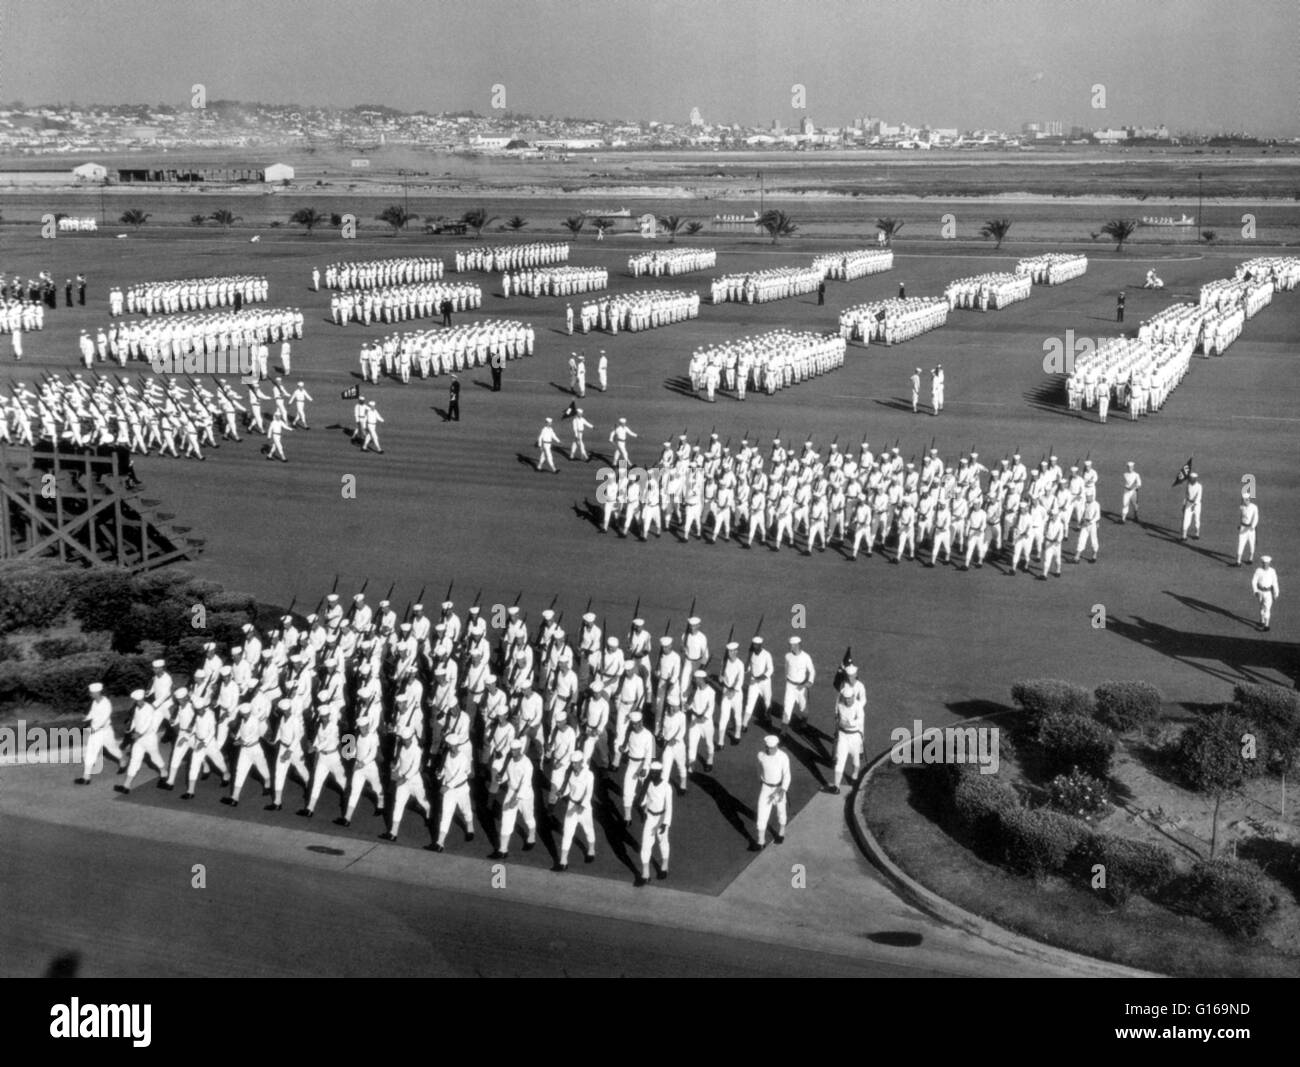 United States Naval Training Center, San Diego, California, late 1940's. A military parade is a formation of soldiers whose movement is restricted by close-order maneuvering known as drilling, formation, marching, or military review .The United States Navy (USN) is the naval warfare service branch of the United States Armed Forces and one of the seven uniformed services of the United States. Naval Training Center San Diego (NTC San Diego) (1923-1997) is a former United States Navy base located at the north end of San Diego Bay. The Naval Training Center site is listed on the National Register  Stock Photo